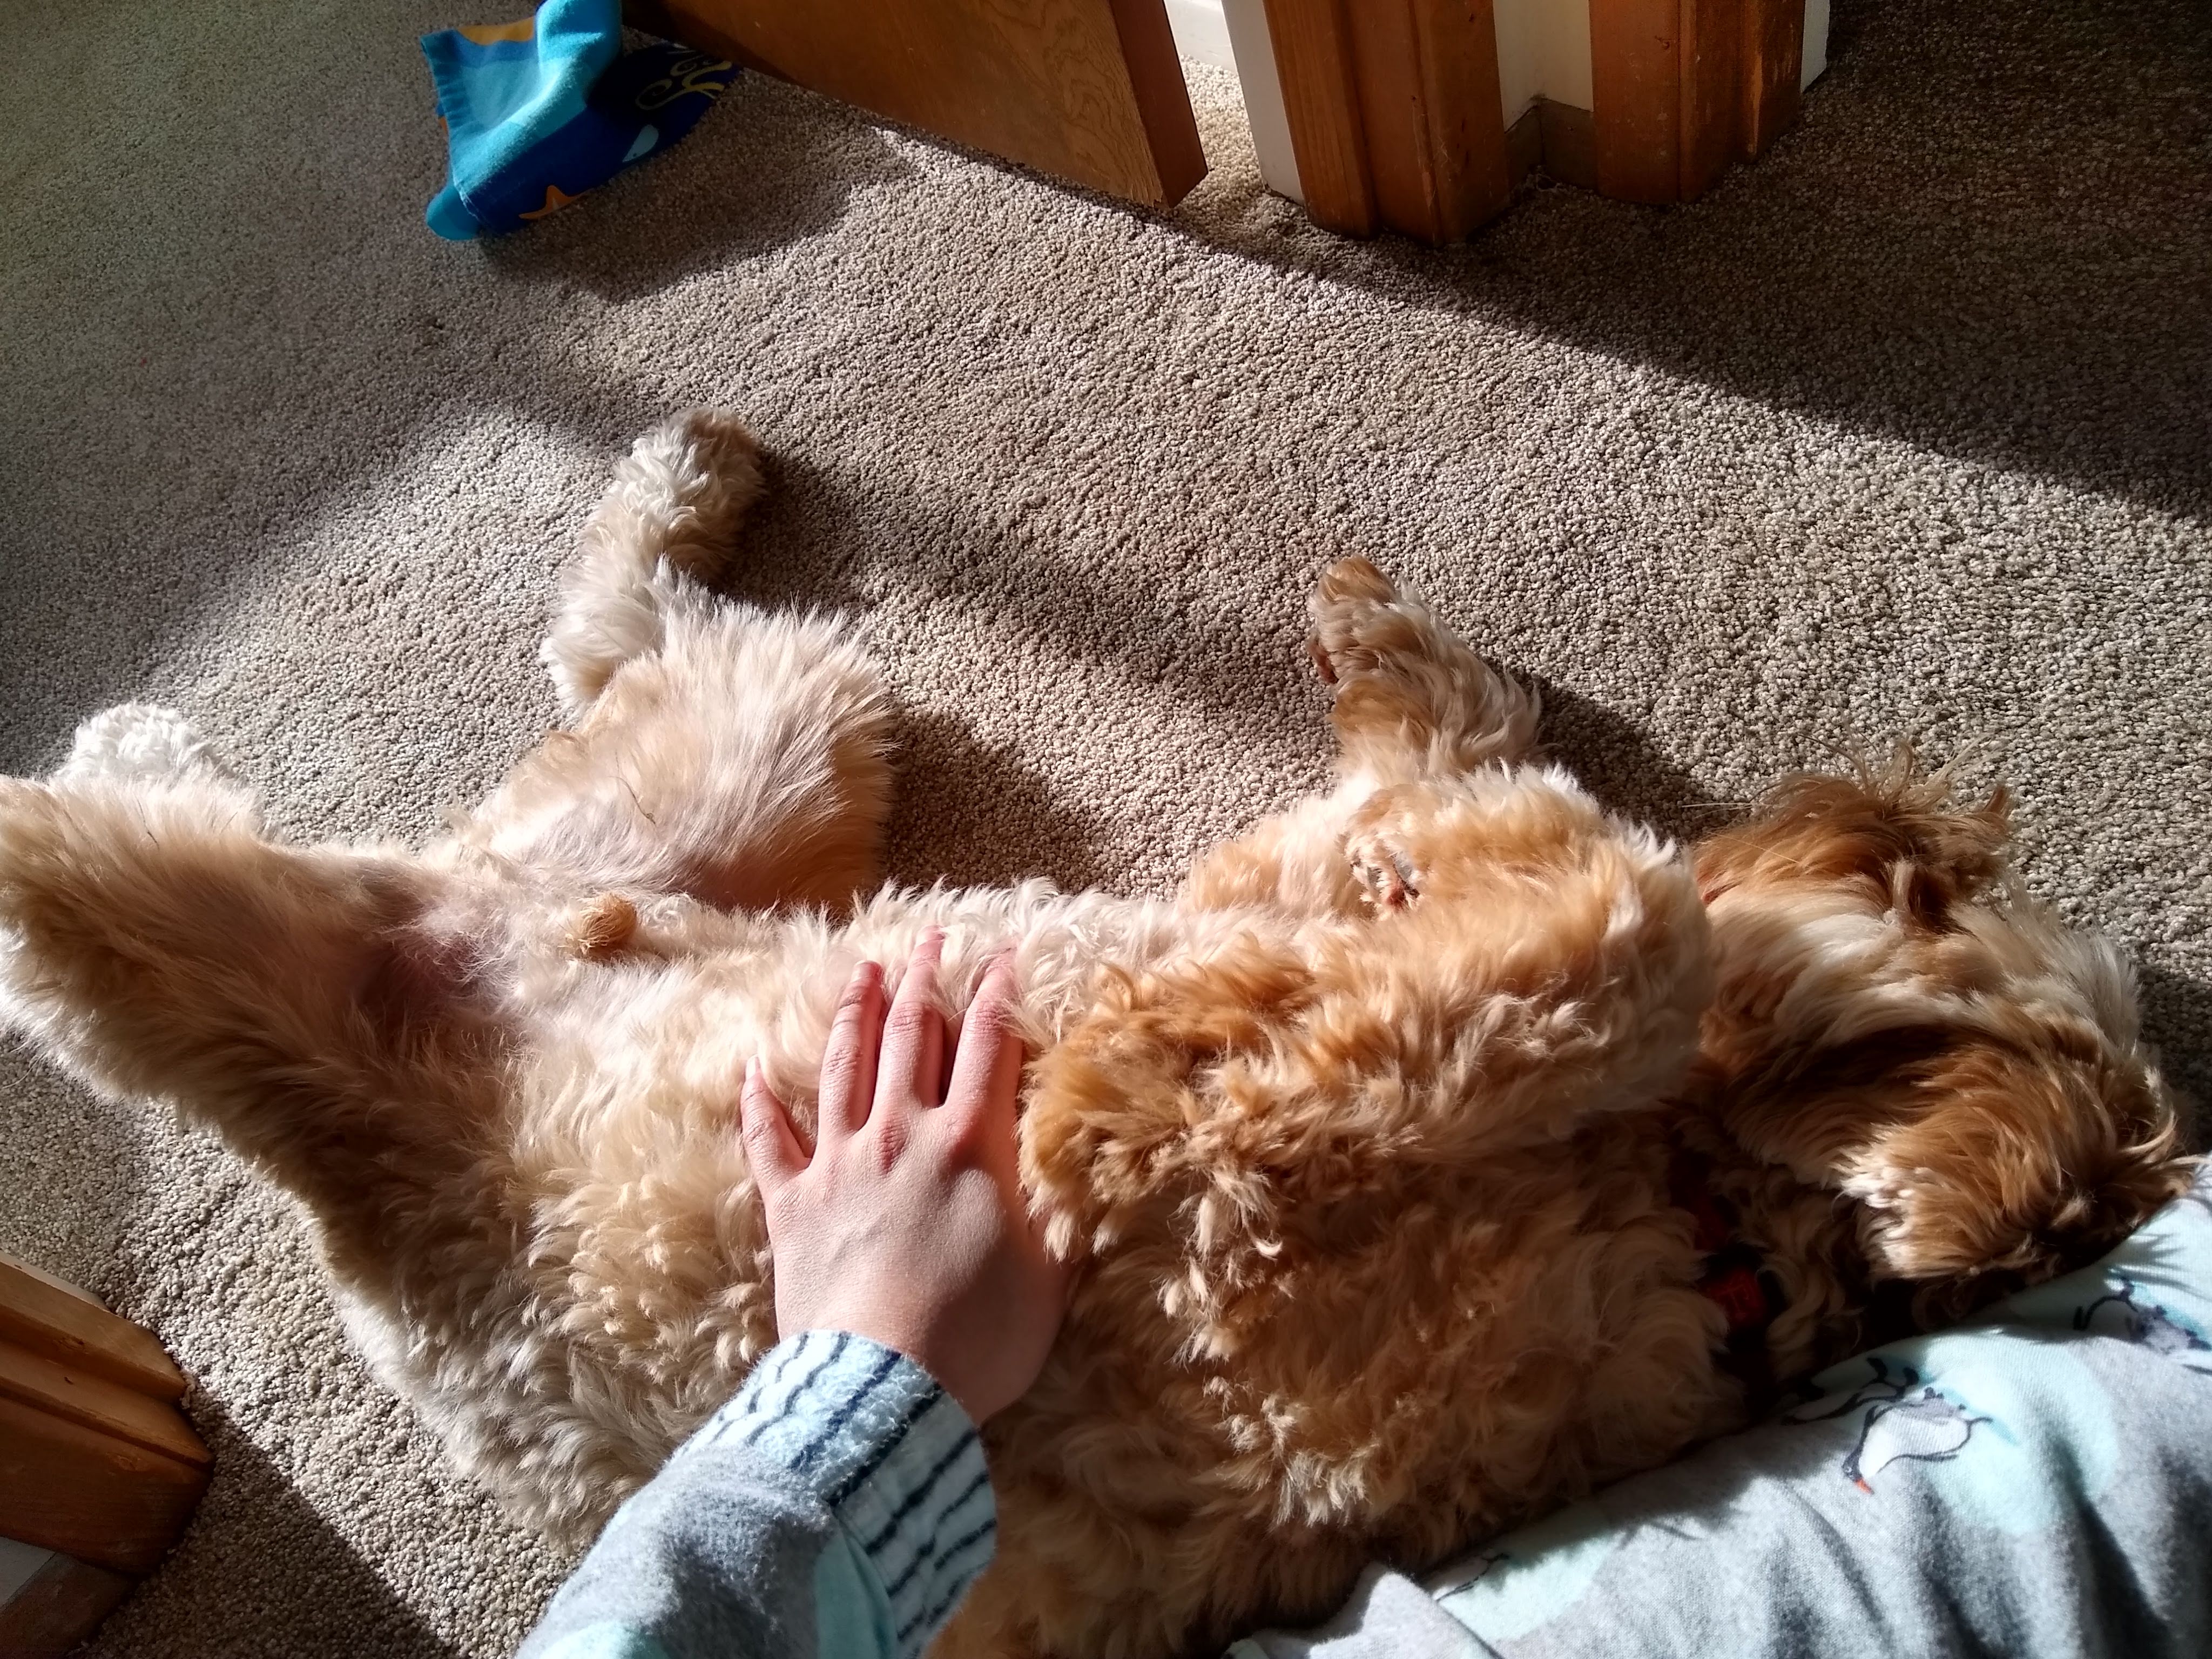 Hachi lying on the floor on his back in sunlight.